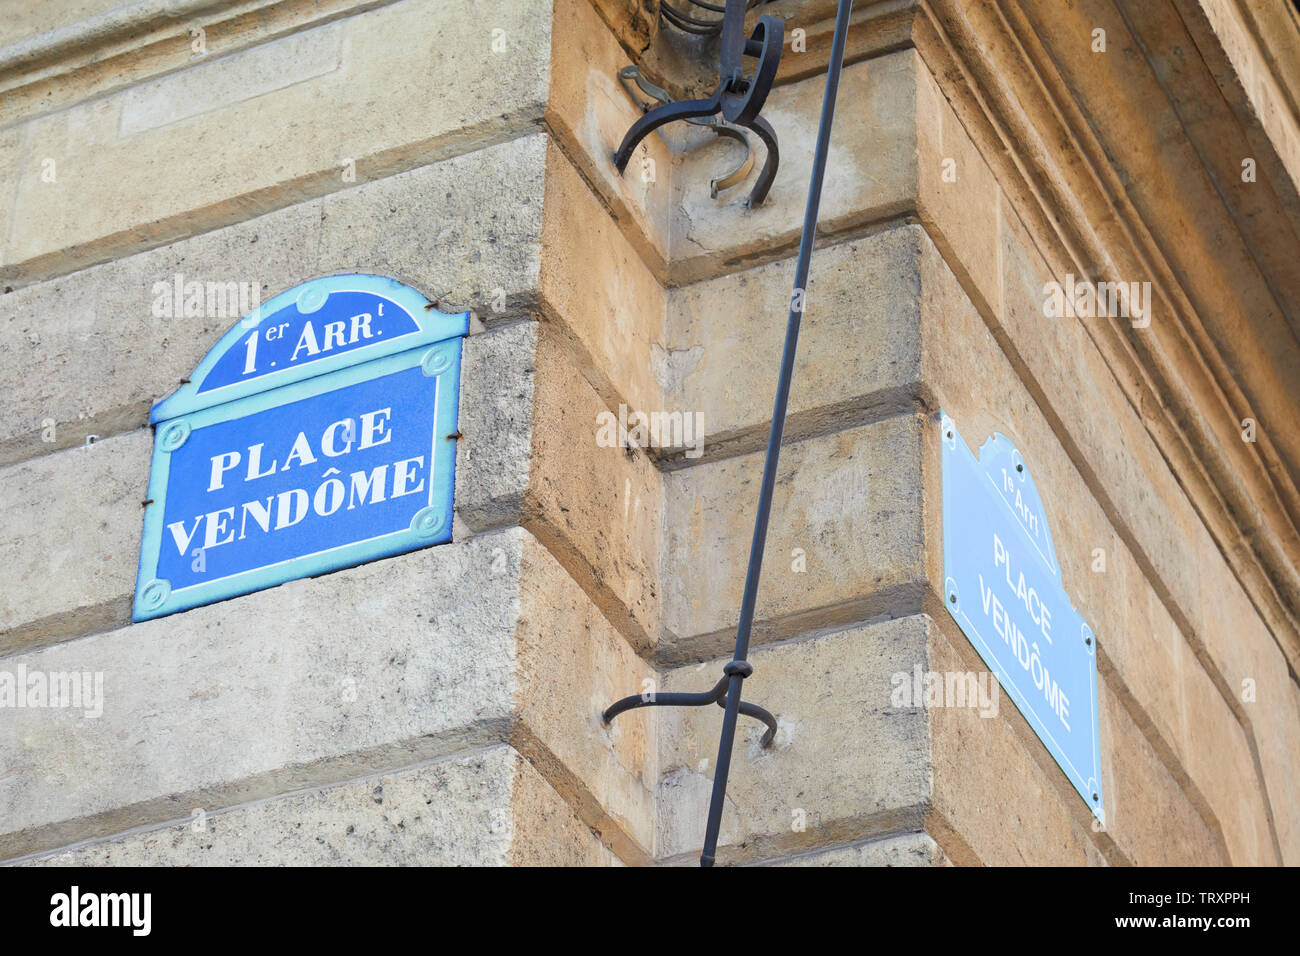 Famous Place Vendome street sign and corner in Paris, France Stock Photo